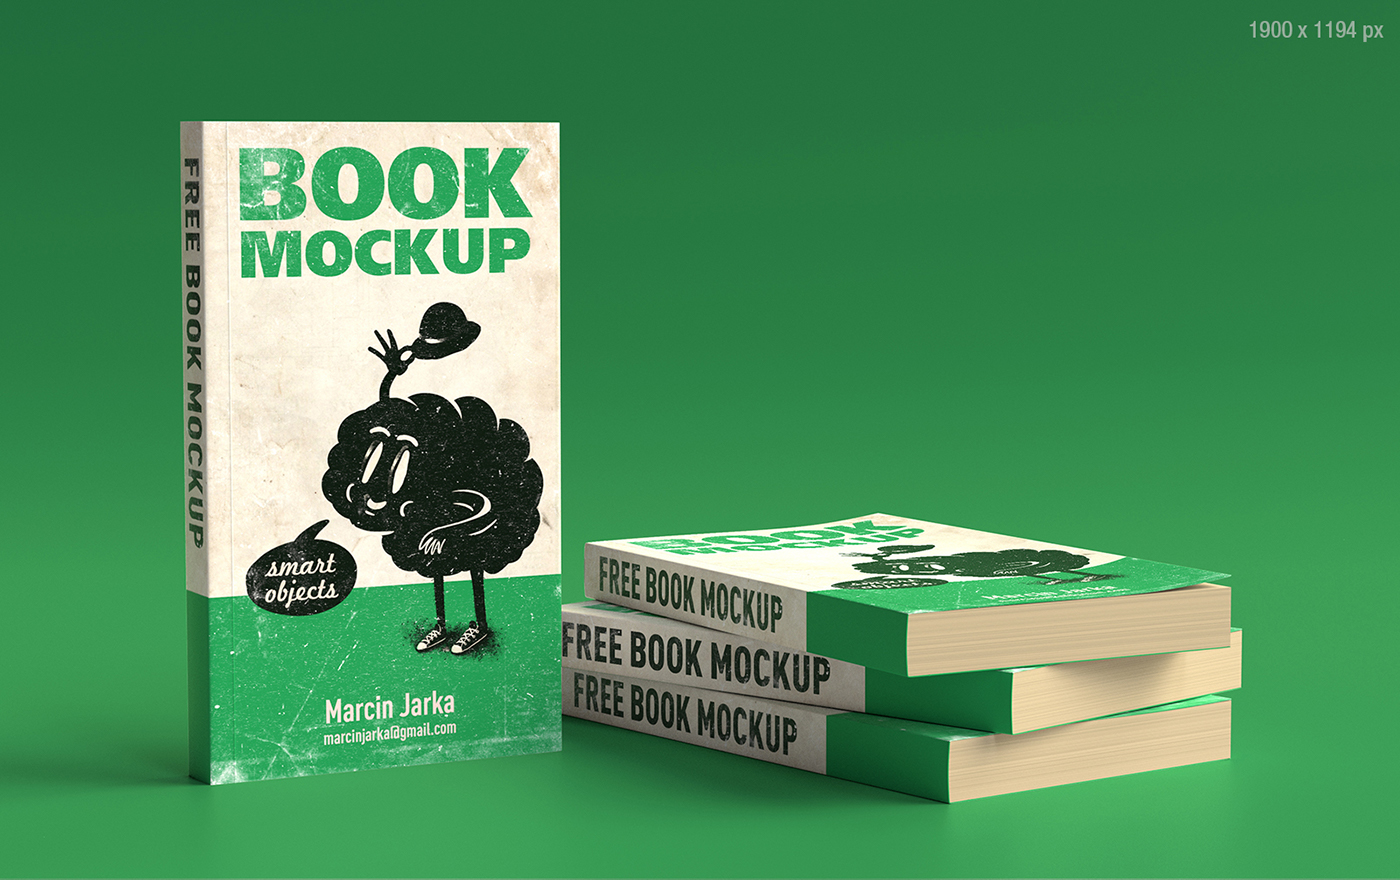 book cover mockup psd file free download